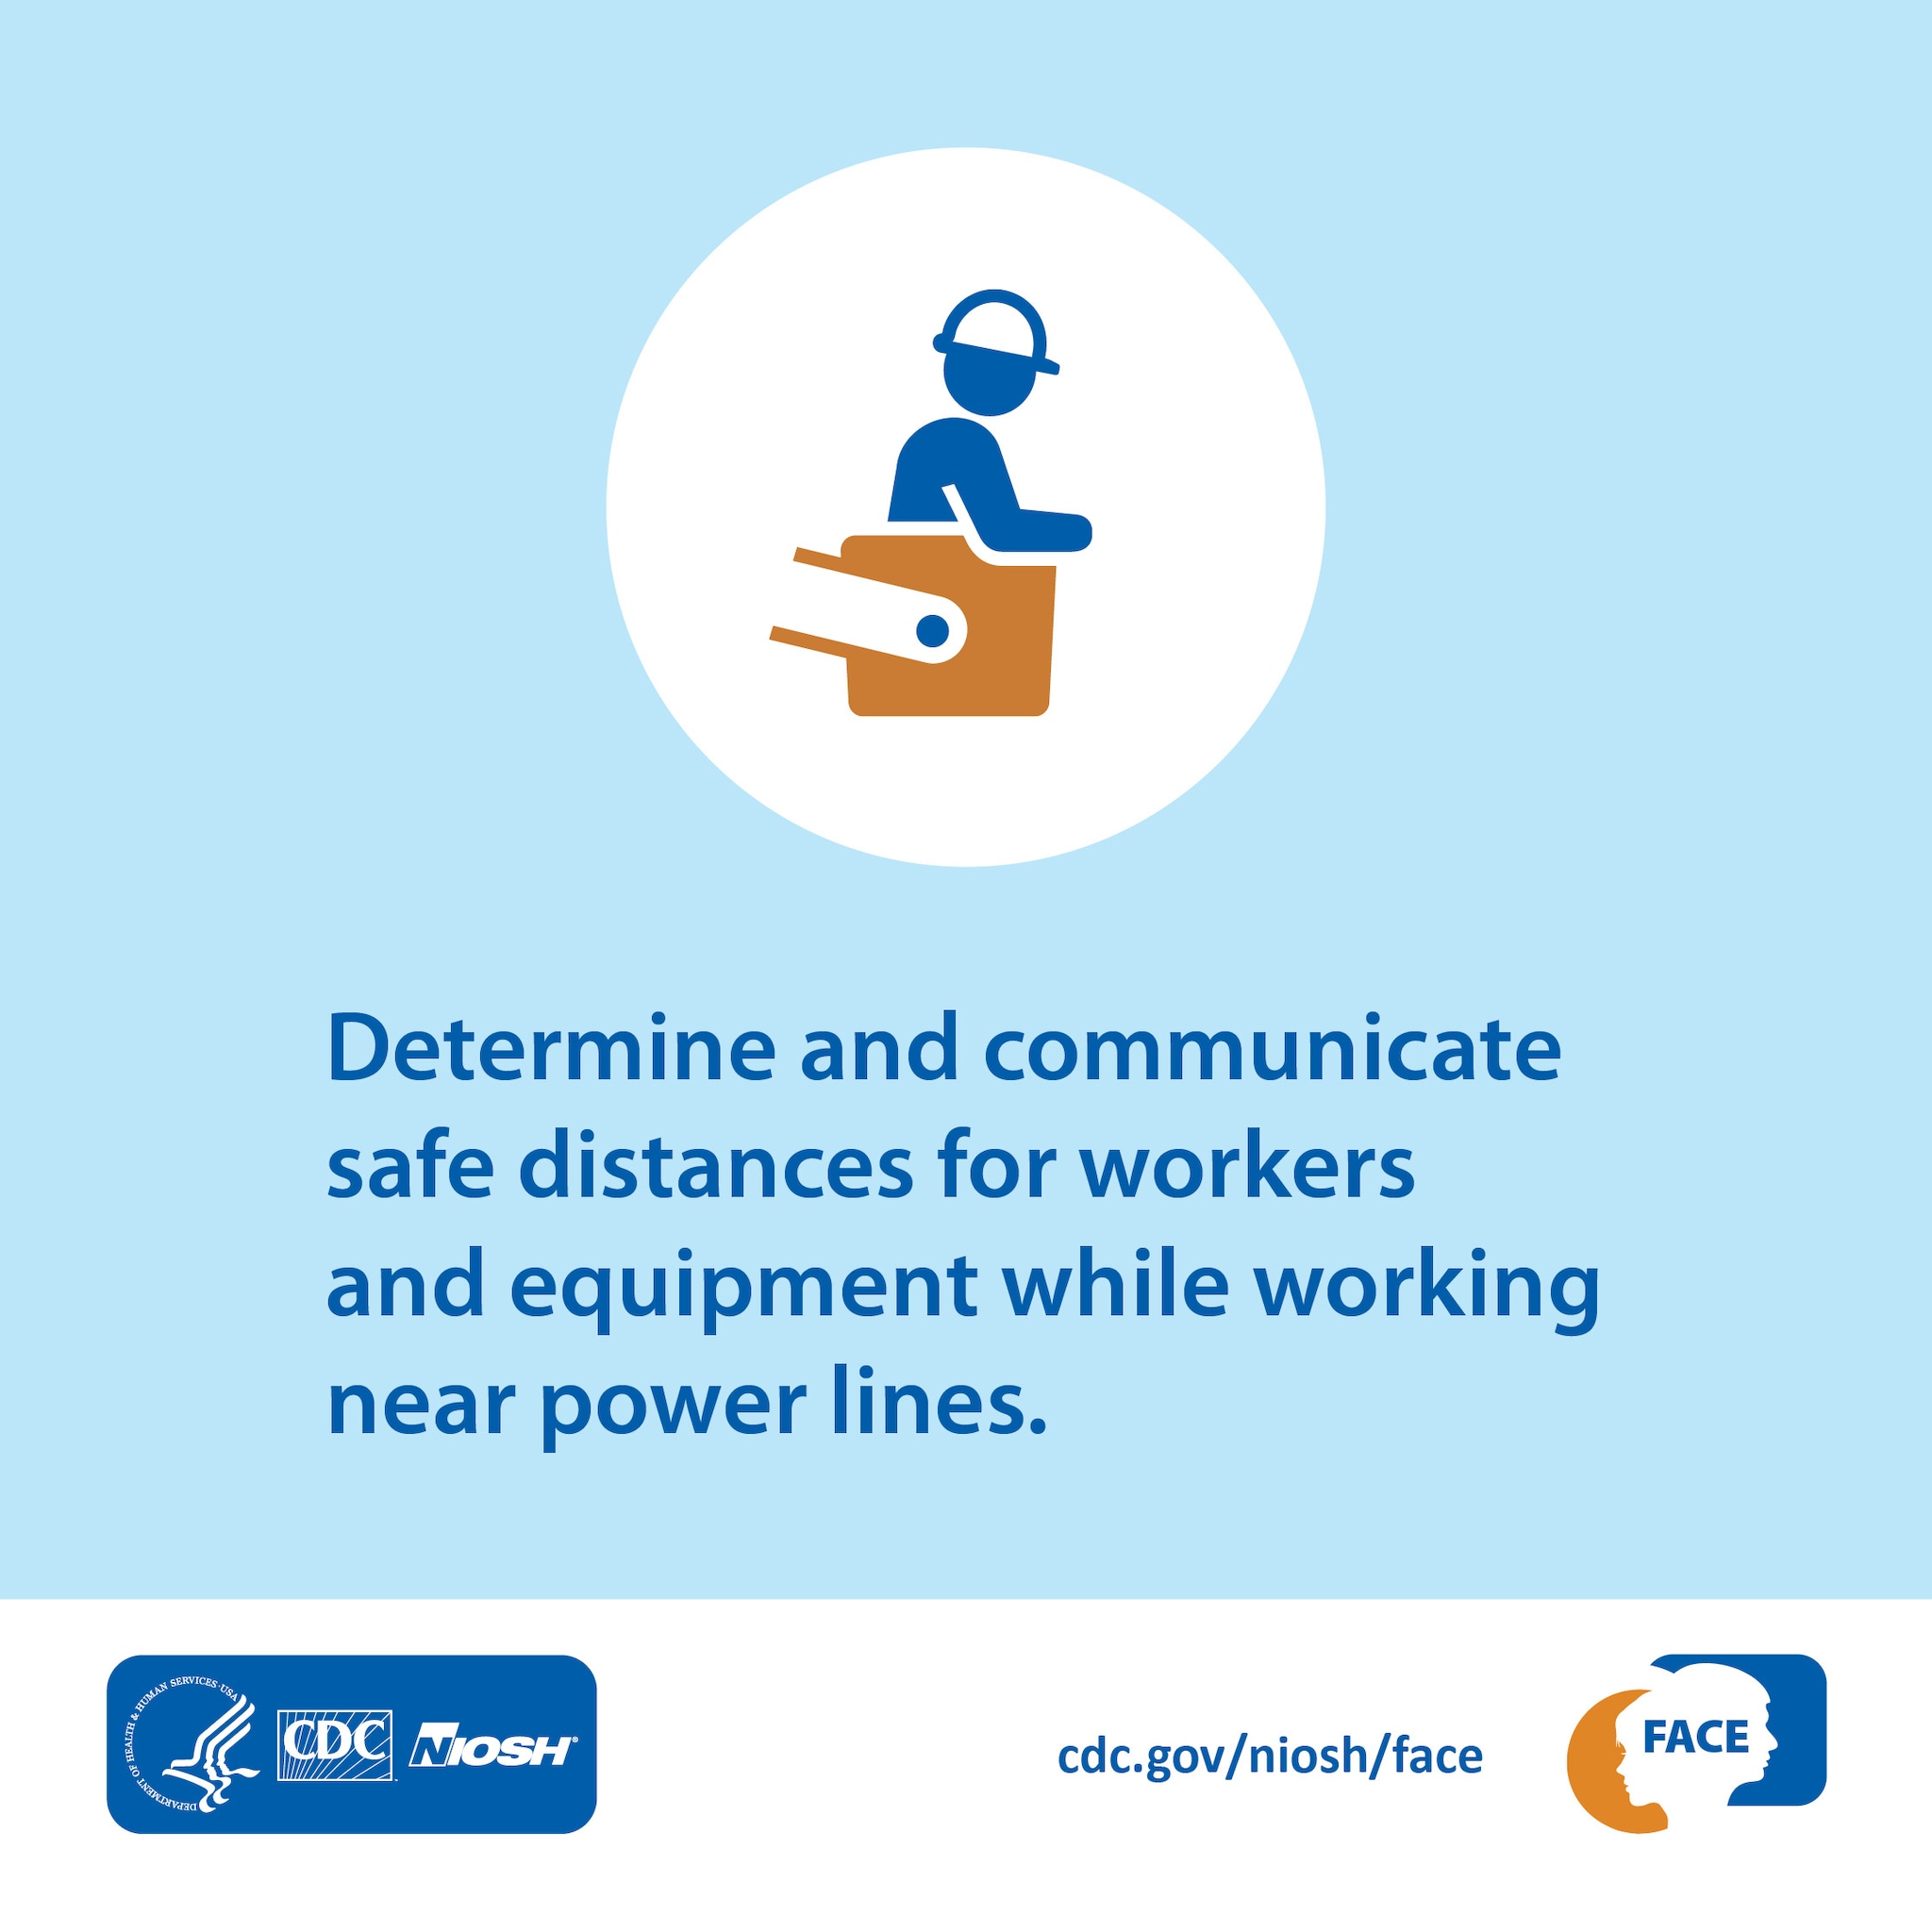 Determine and communicate safe distances for workers and equipment while working near power lines.